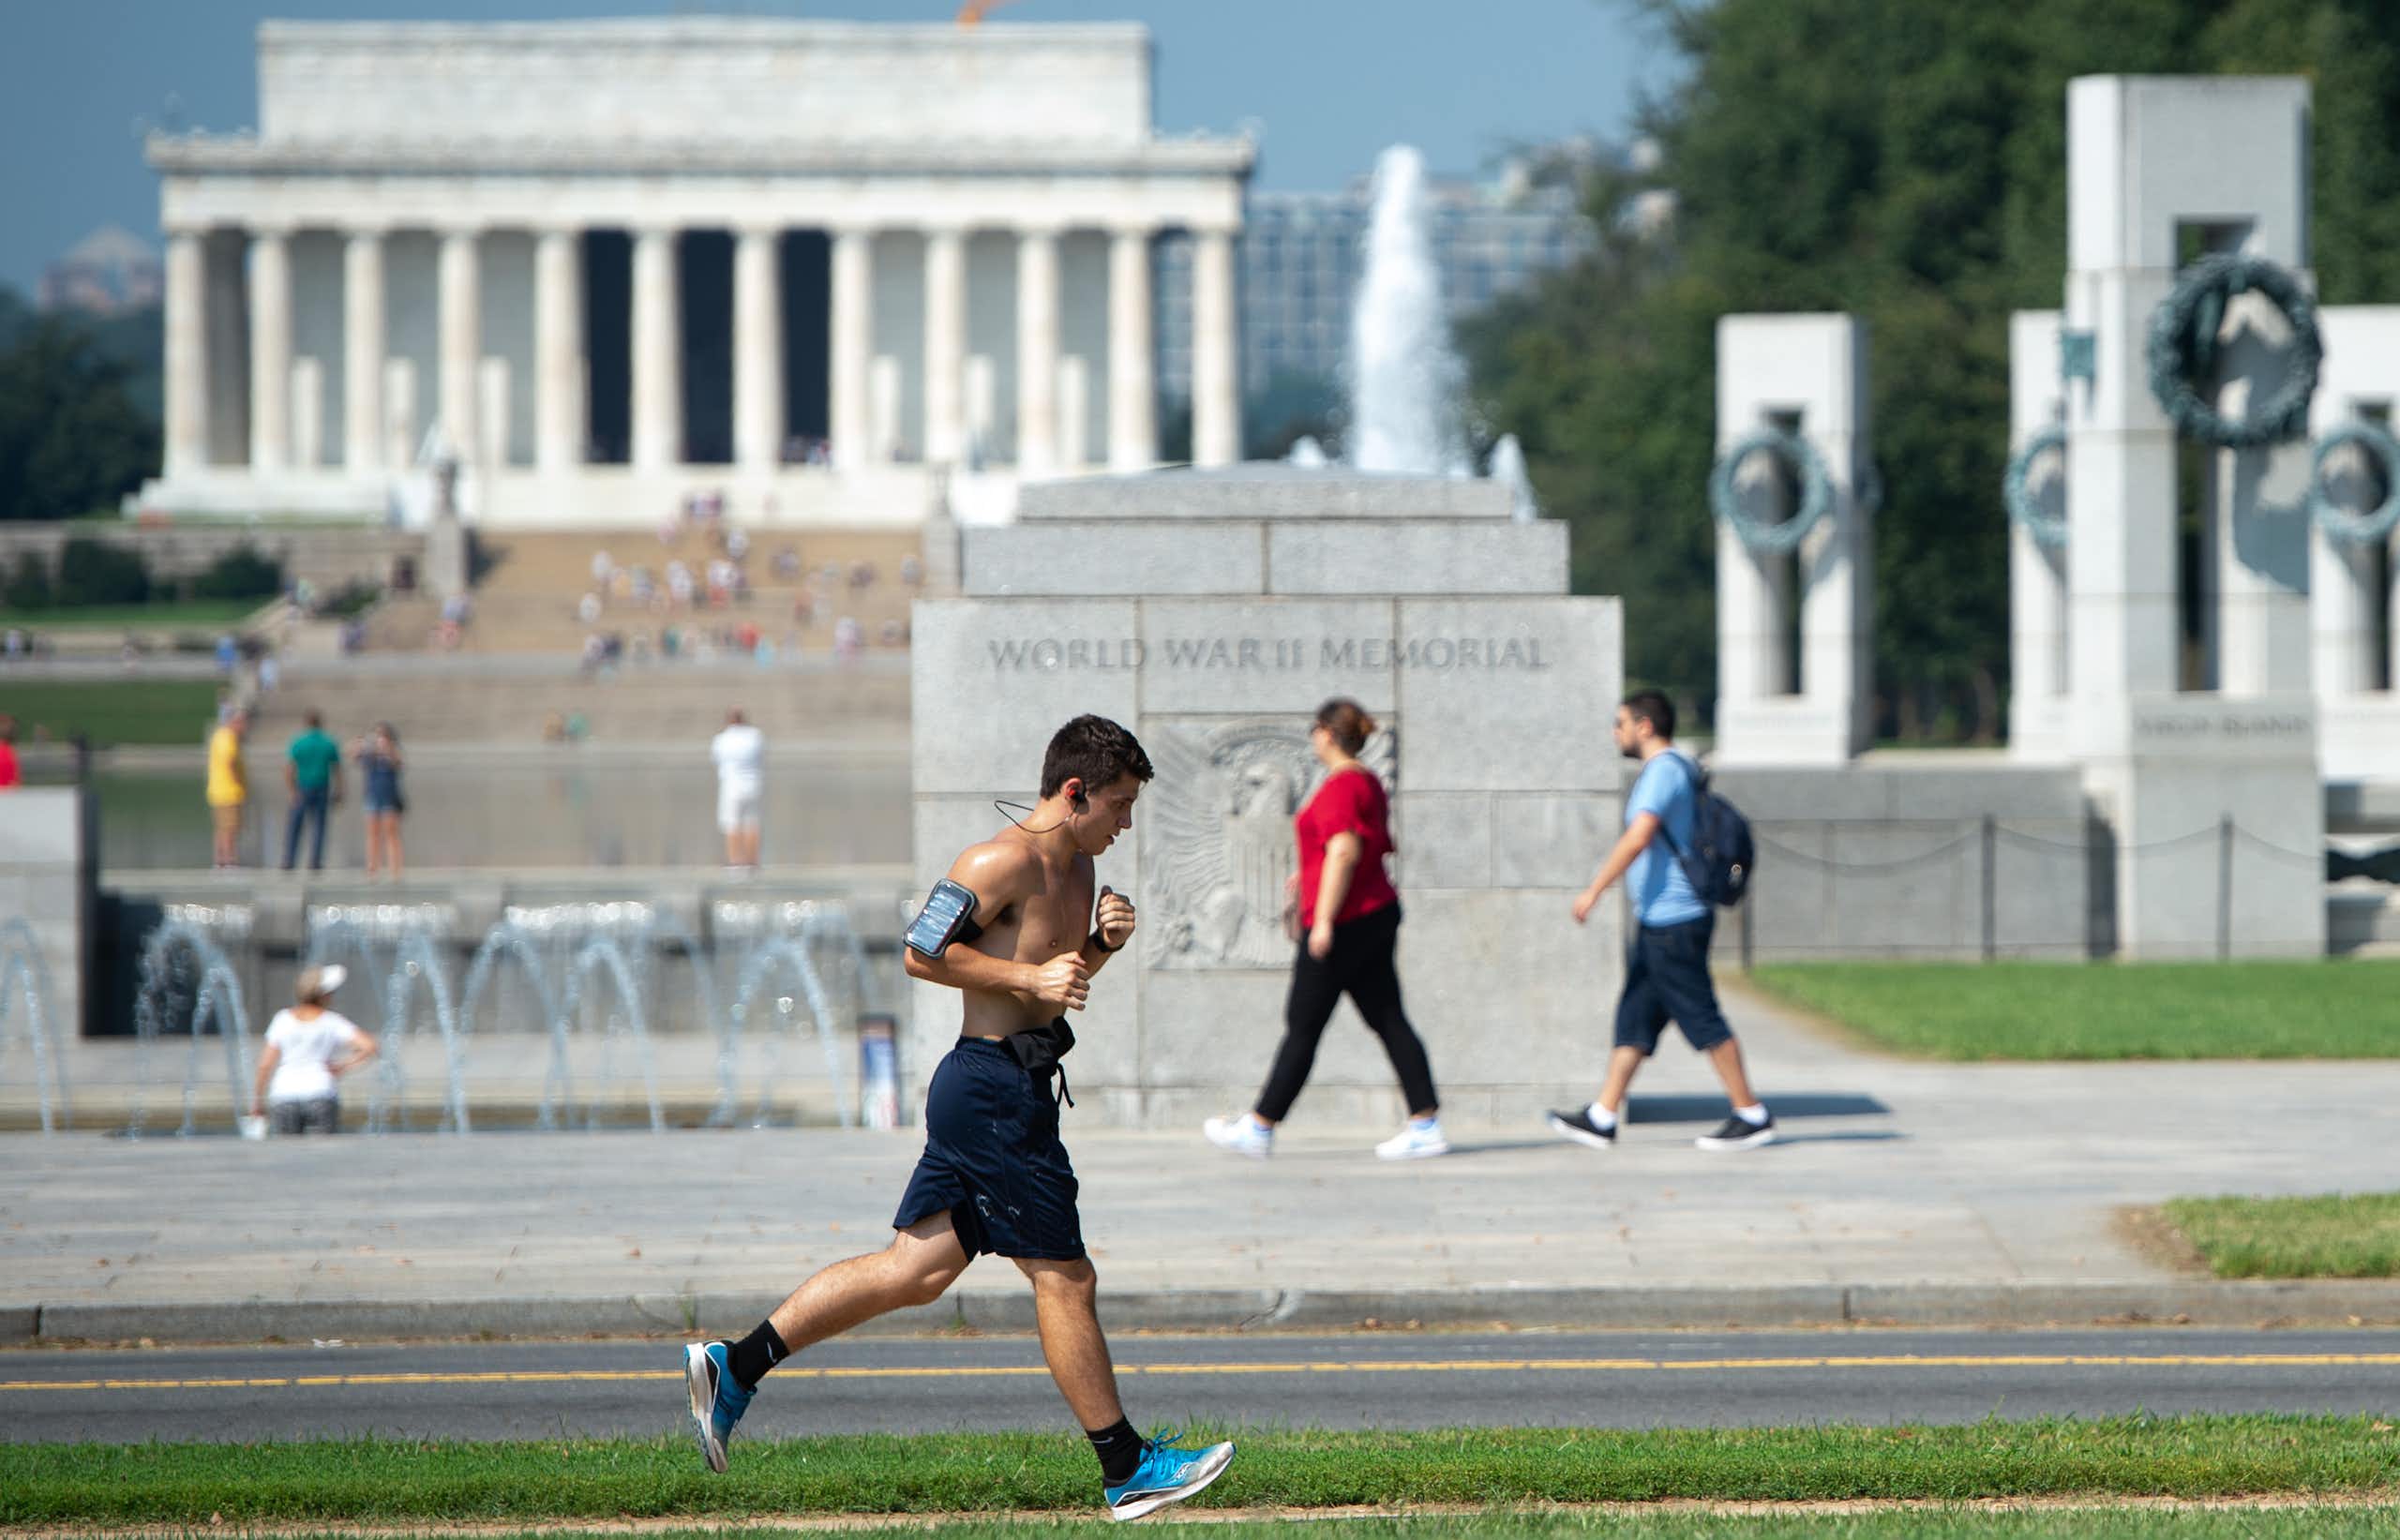 A man runs past the WWII Memorial on a hot day in Washington, D.C., with the Lincoln Memorial in the background